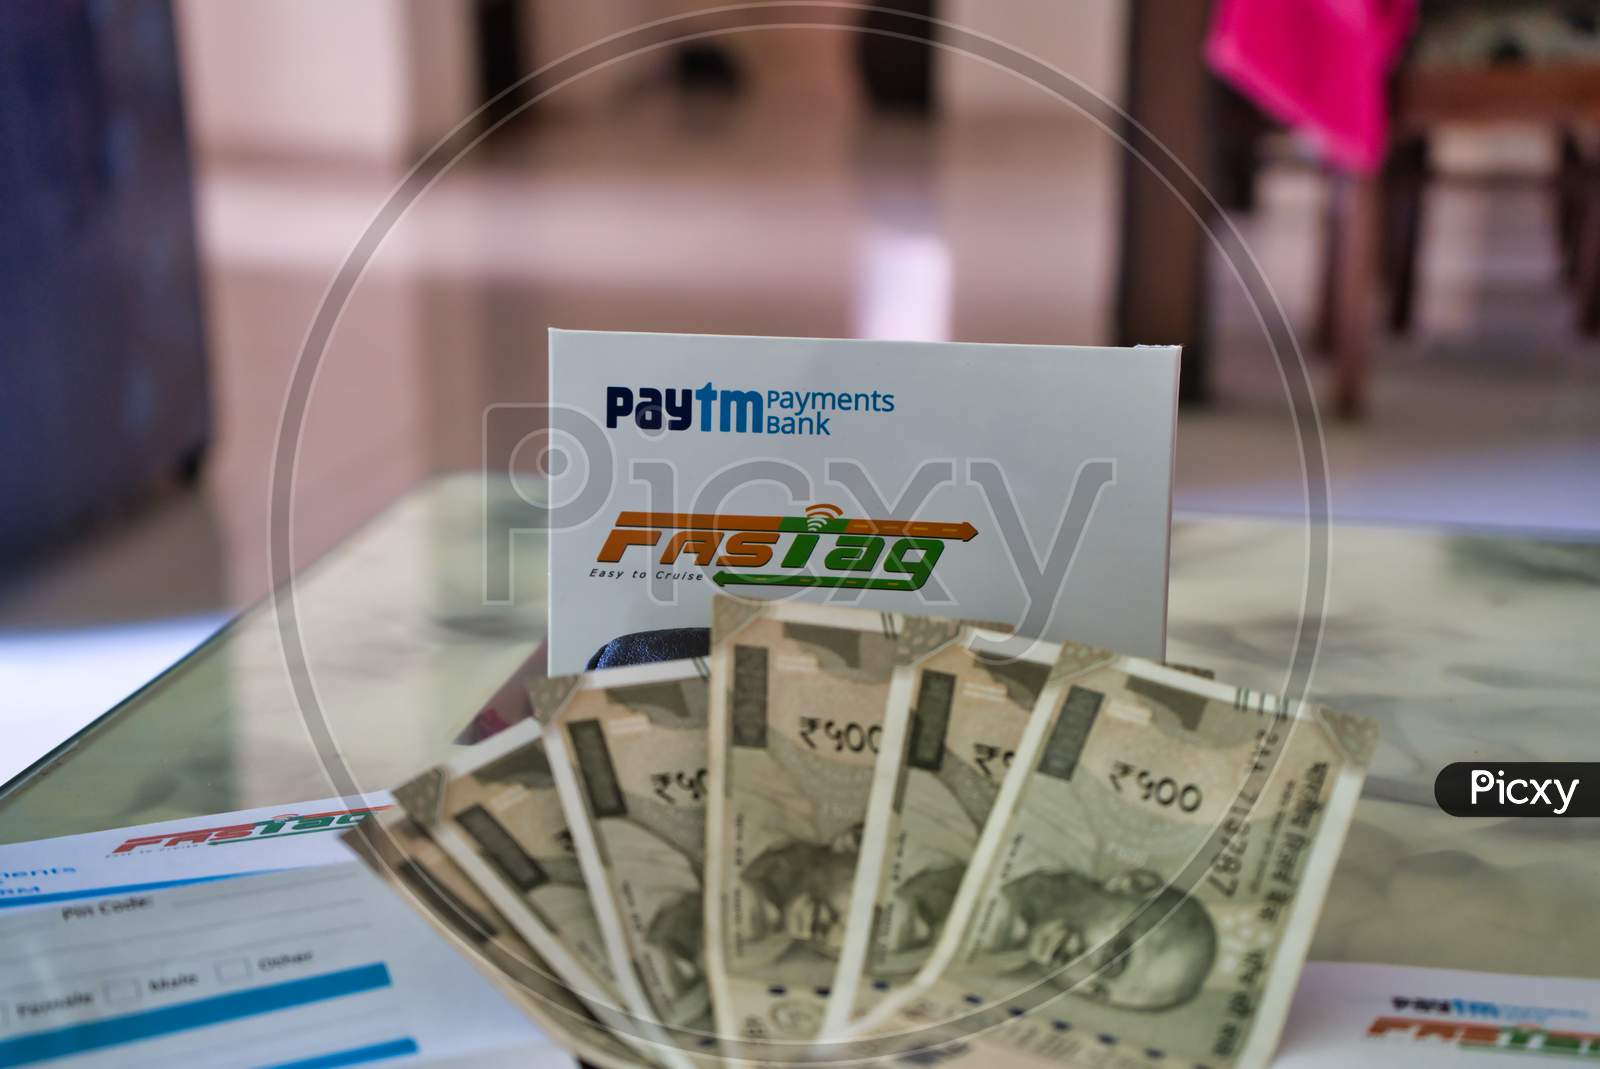 Fast Tag Provided By Paytm Payment Bank On A Beautifully Crafted Table Along With Currency Notes.